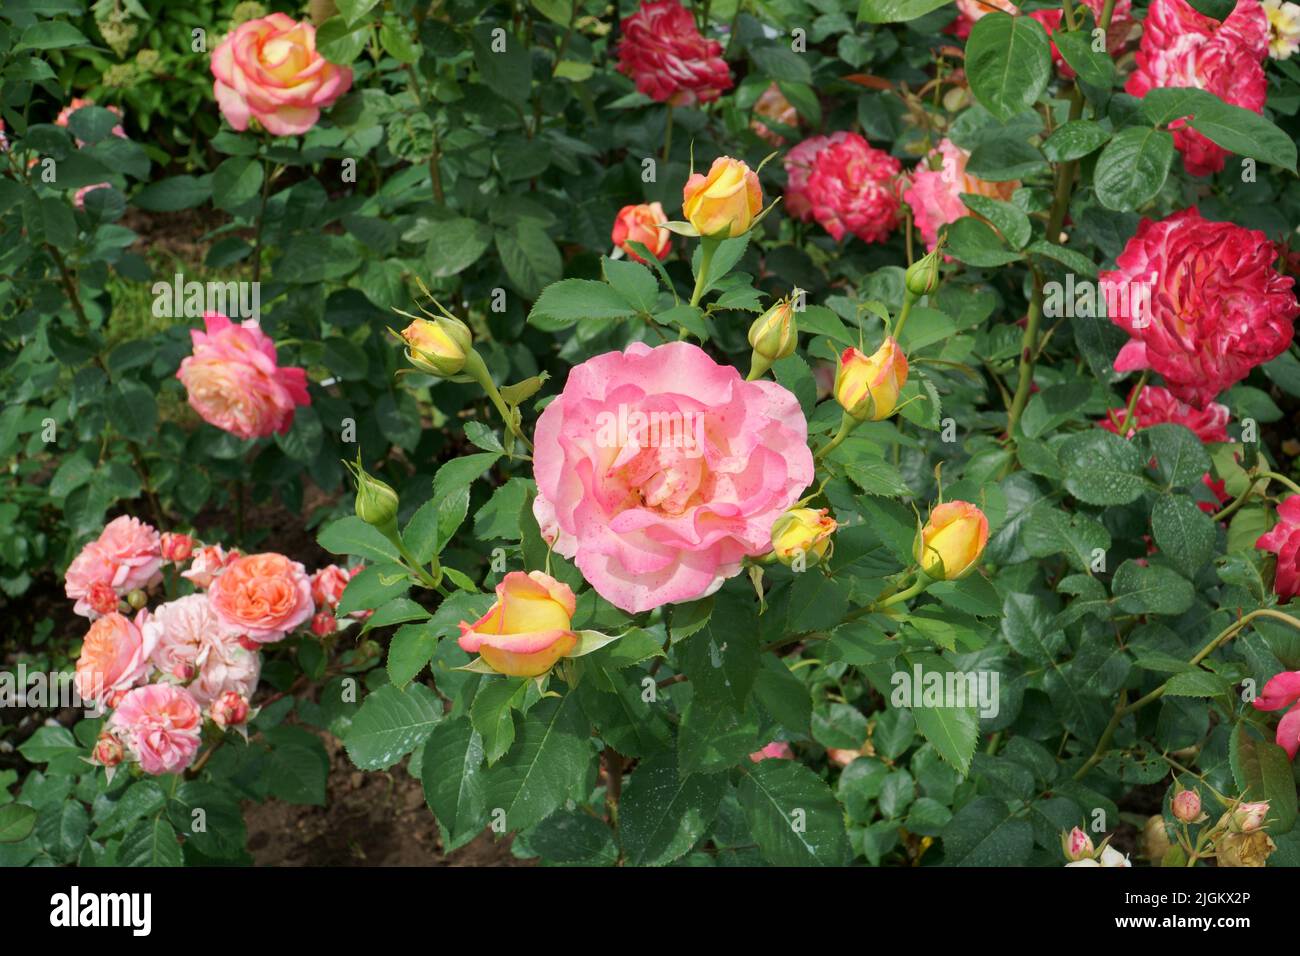 Colorful, flowering roses in a view from the top - royal species of garden plants that can be used in the landscape design. Flowering English roses sa Stock Photo